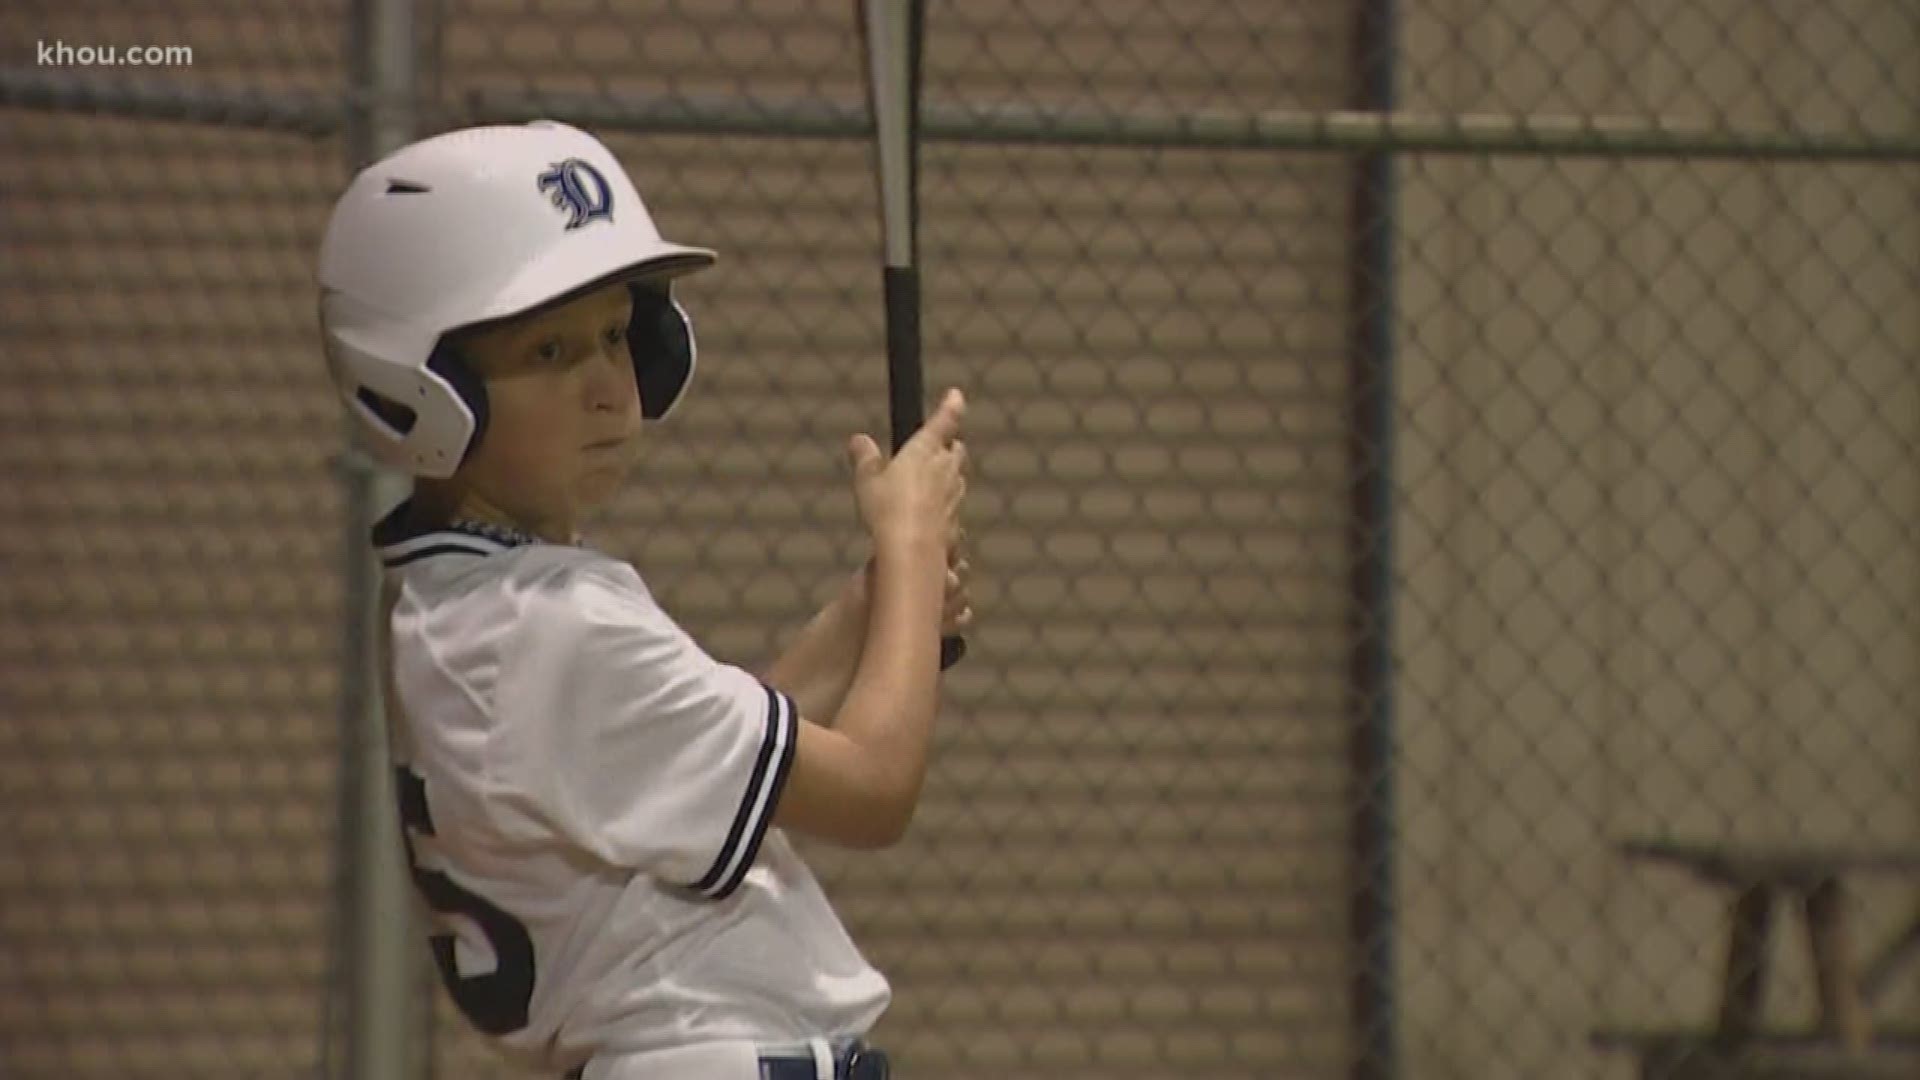 A young baseball player, born with three holes in his heart, is back on the field one month after having heart surgery.